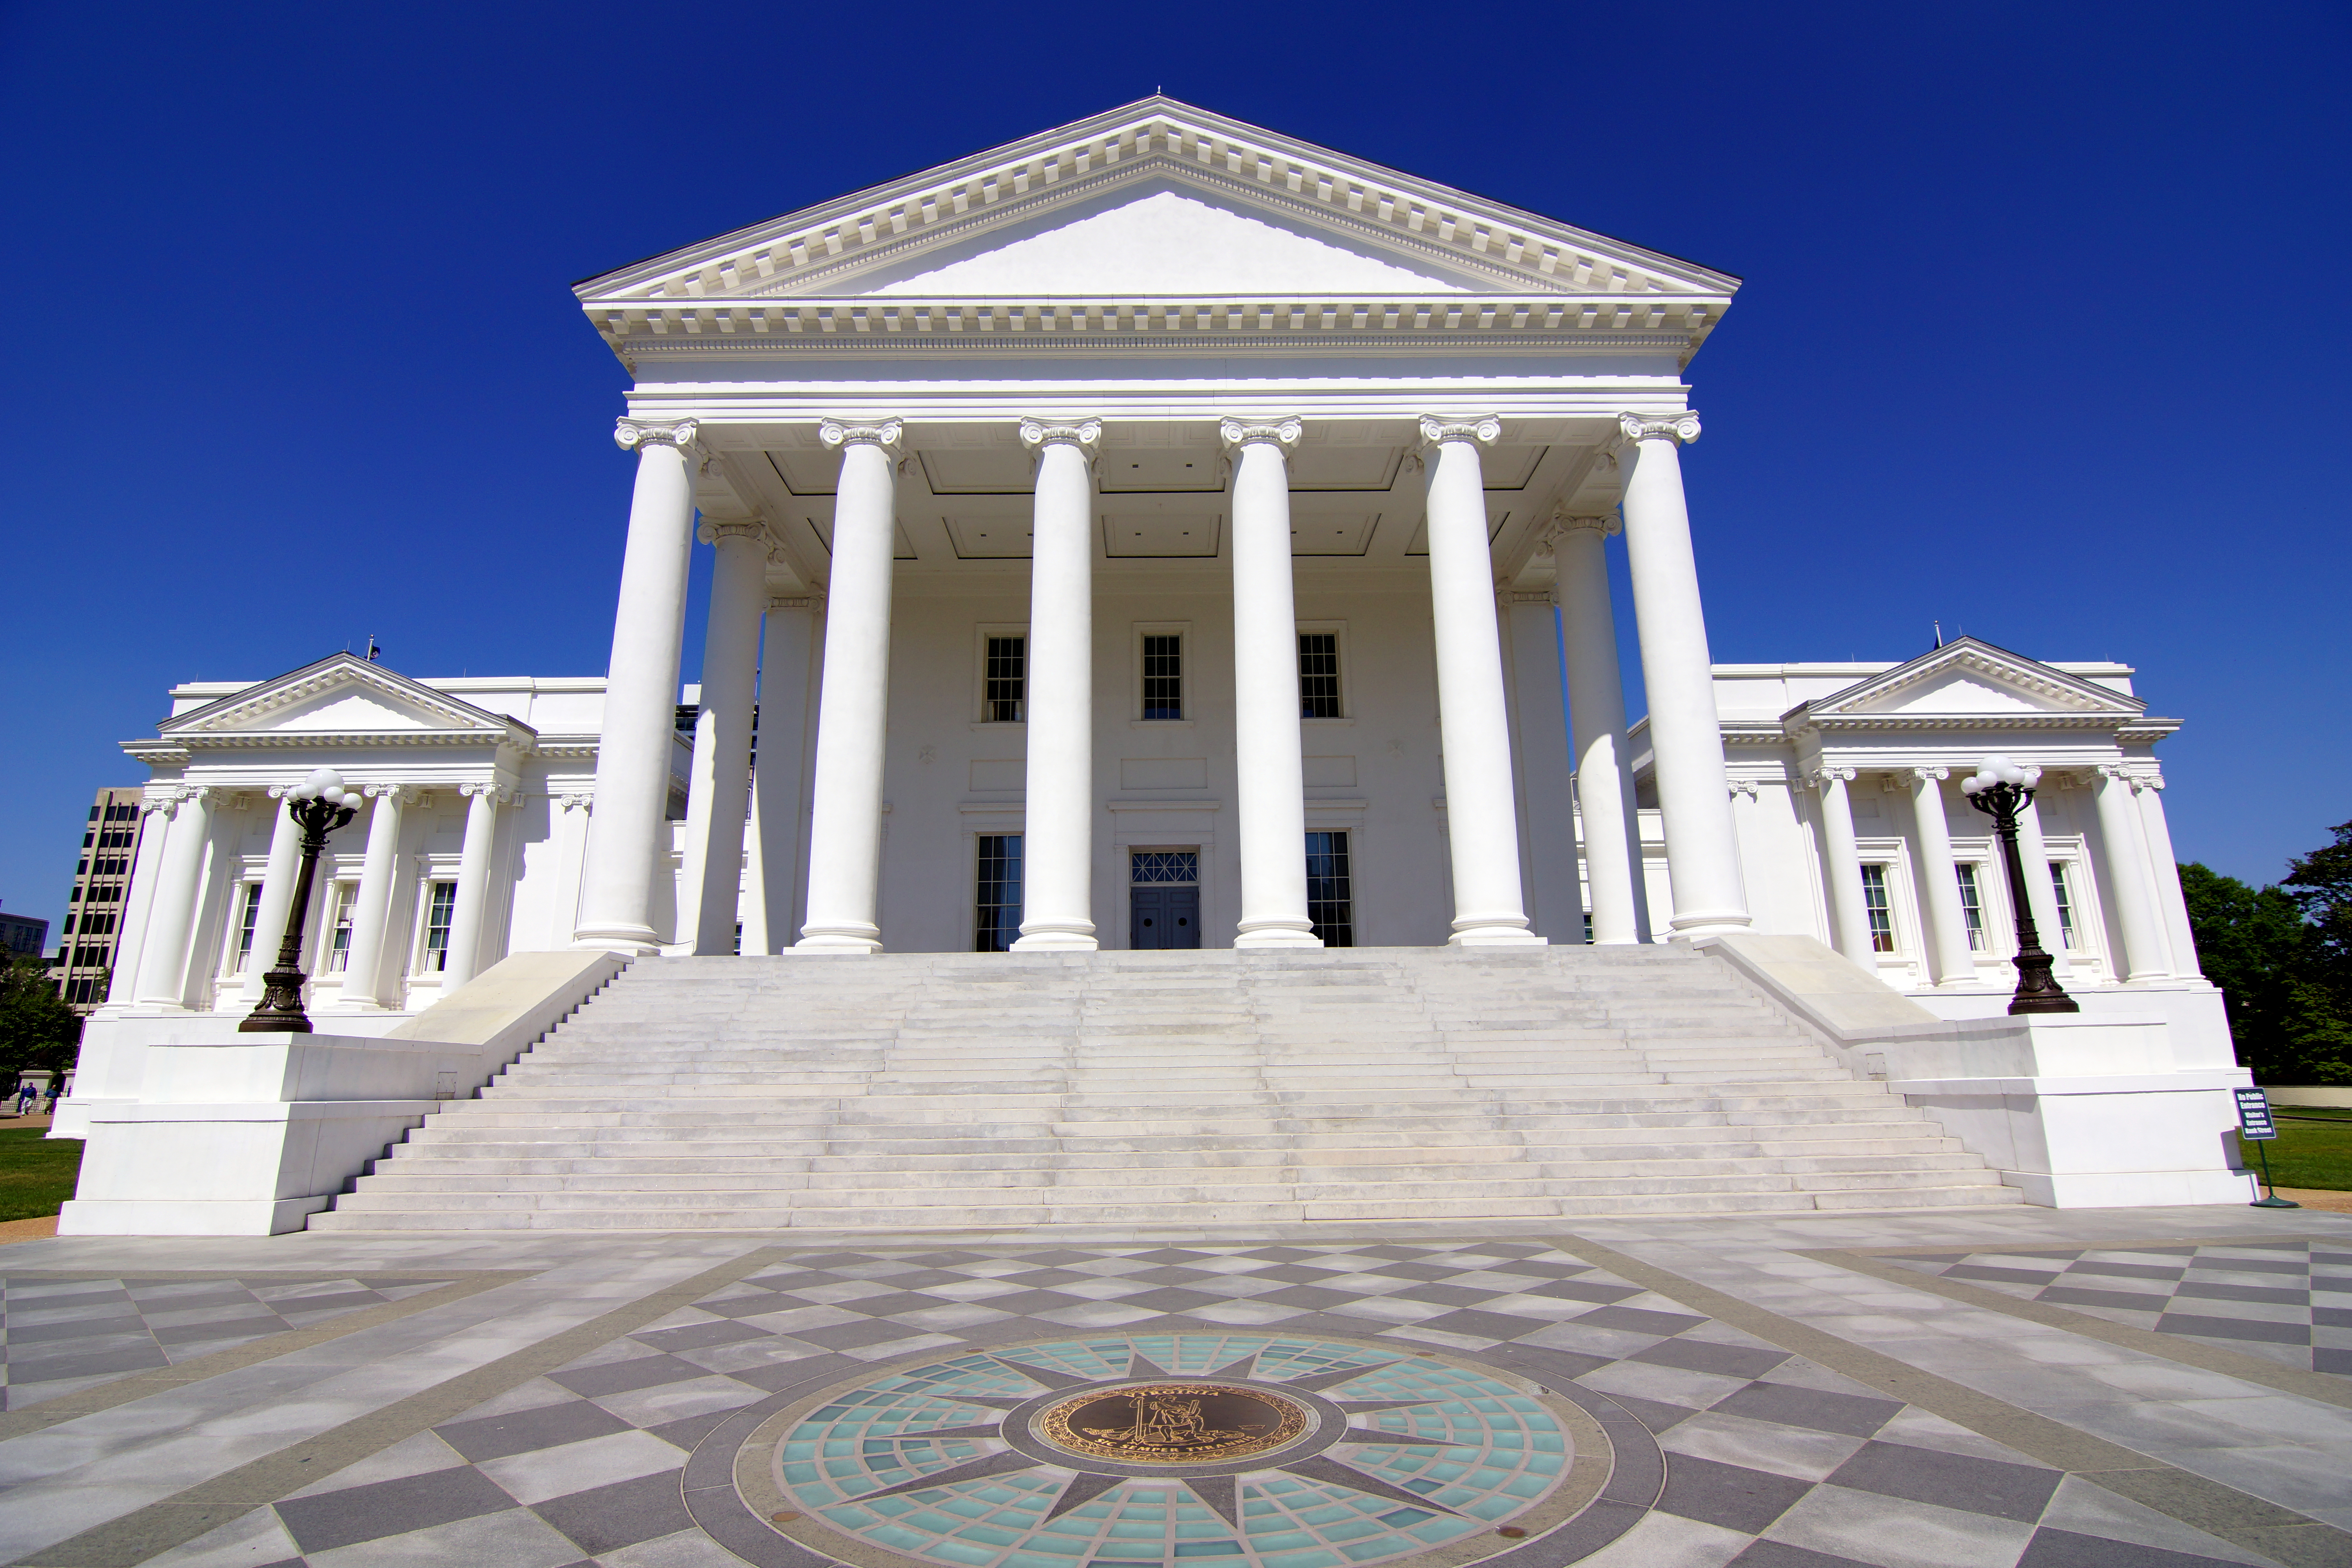 File:Virginia State Capitol Building 2.jpg - Wikimedia Commons